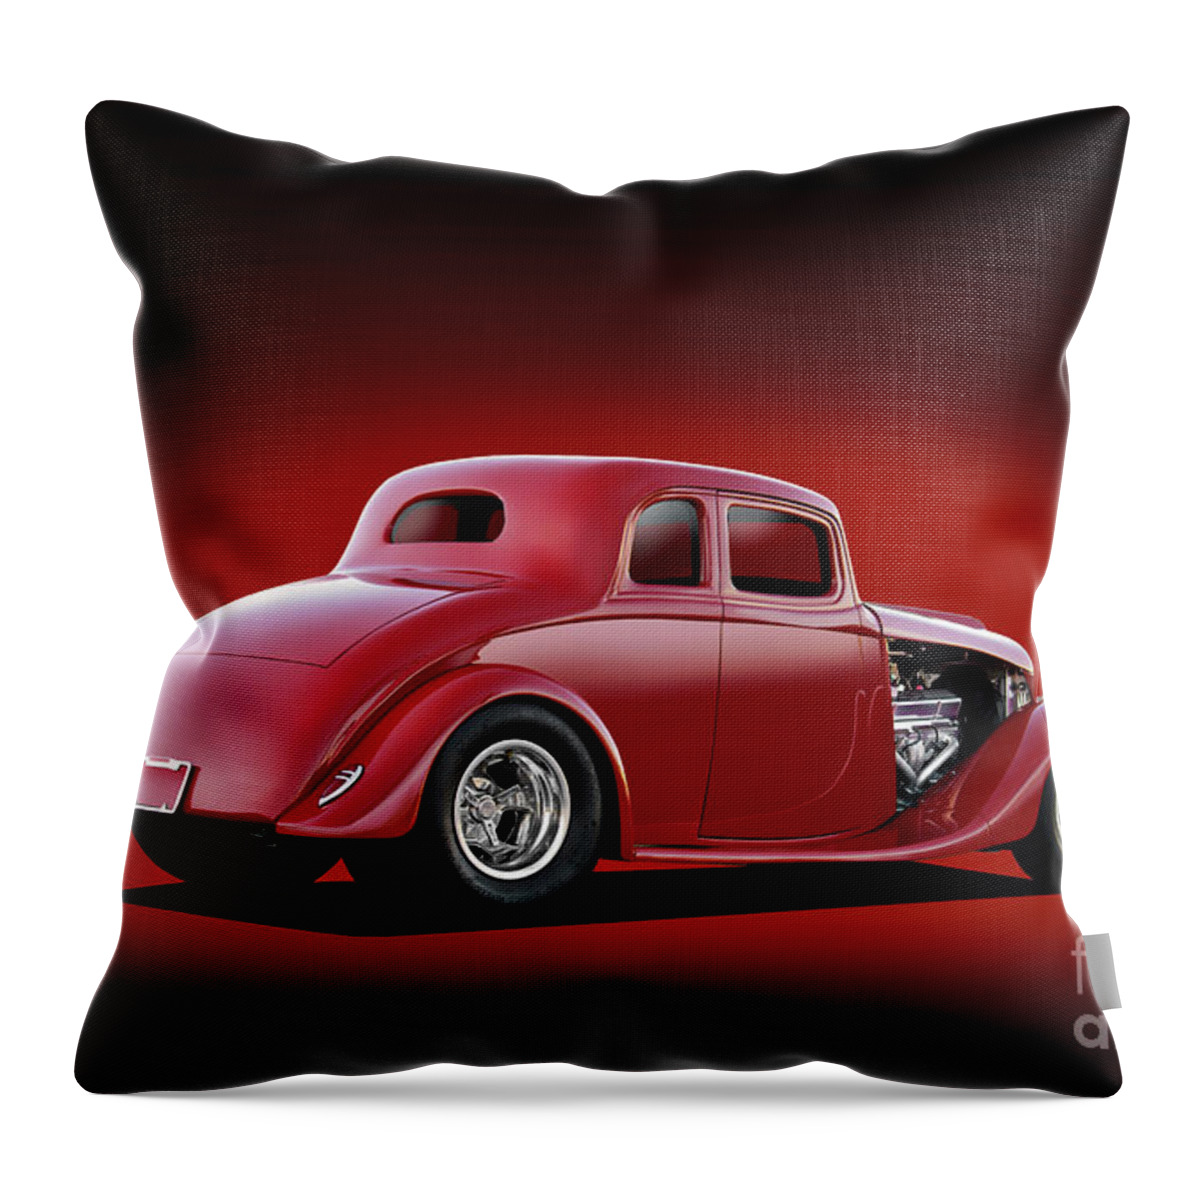 1933 Willys Coupe Throw Pillow featuring the photograph 1933 Willys Model 77 Coupe by Dave Koontz